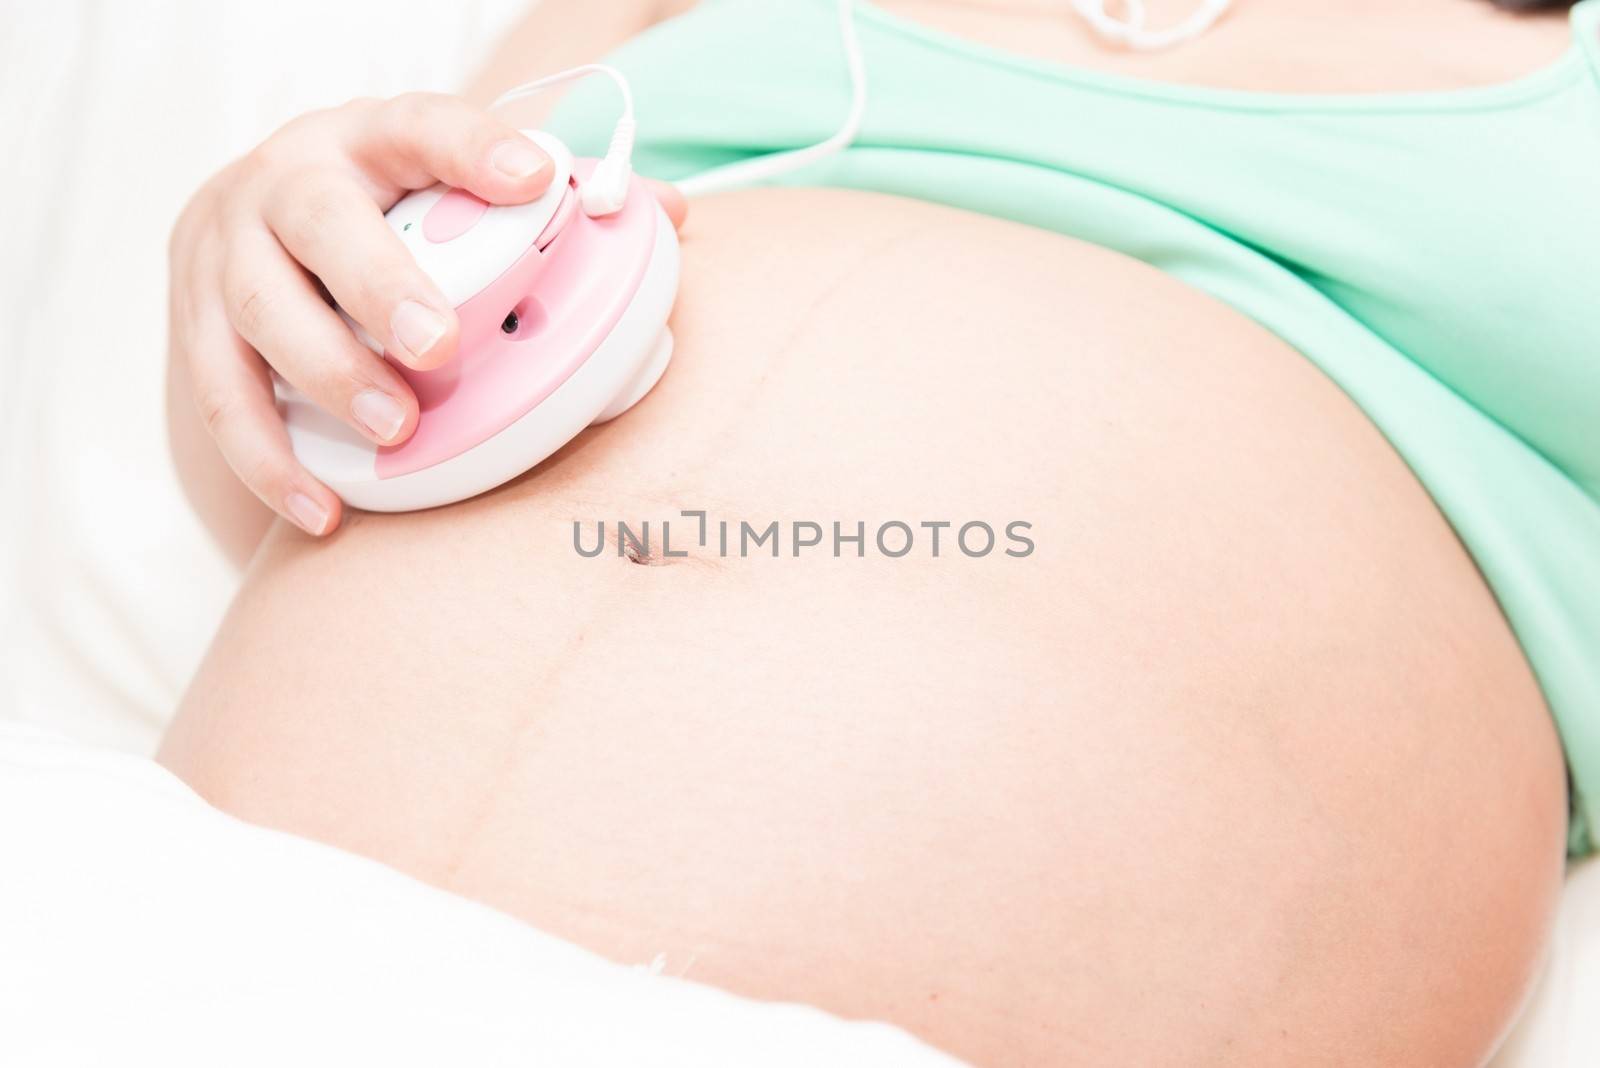 Young thai pregnant woman listening to baby using a listening device